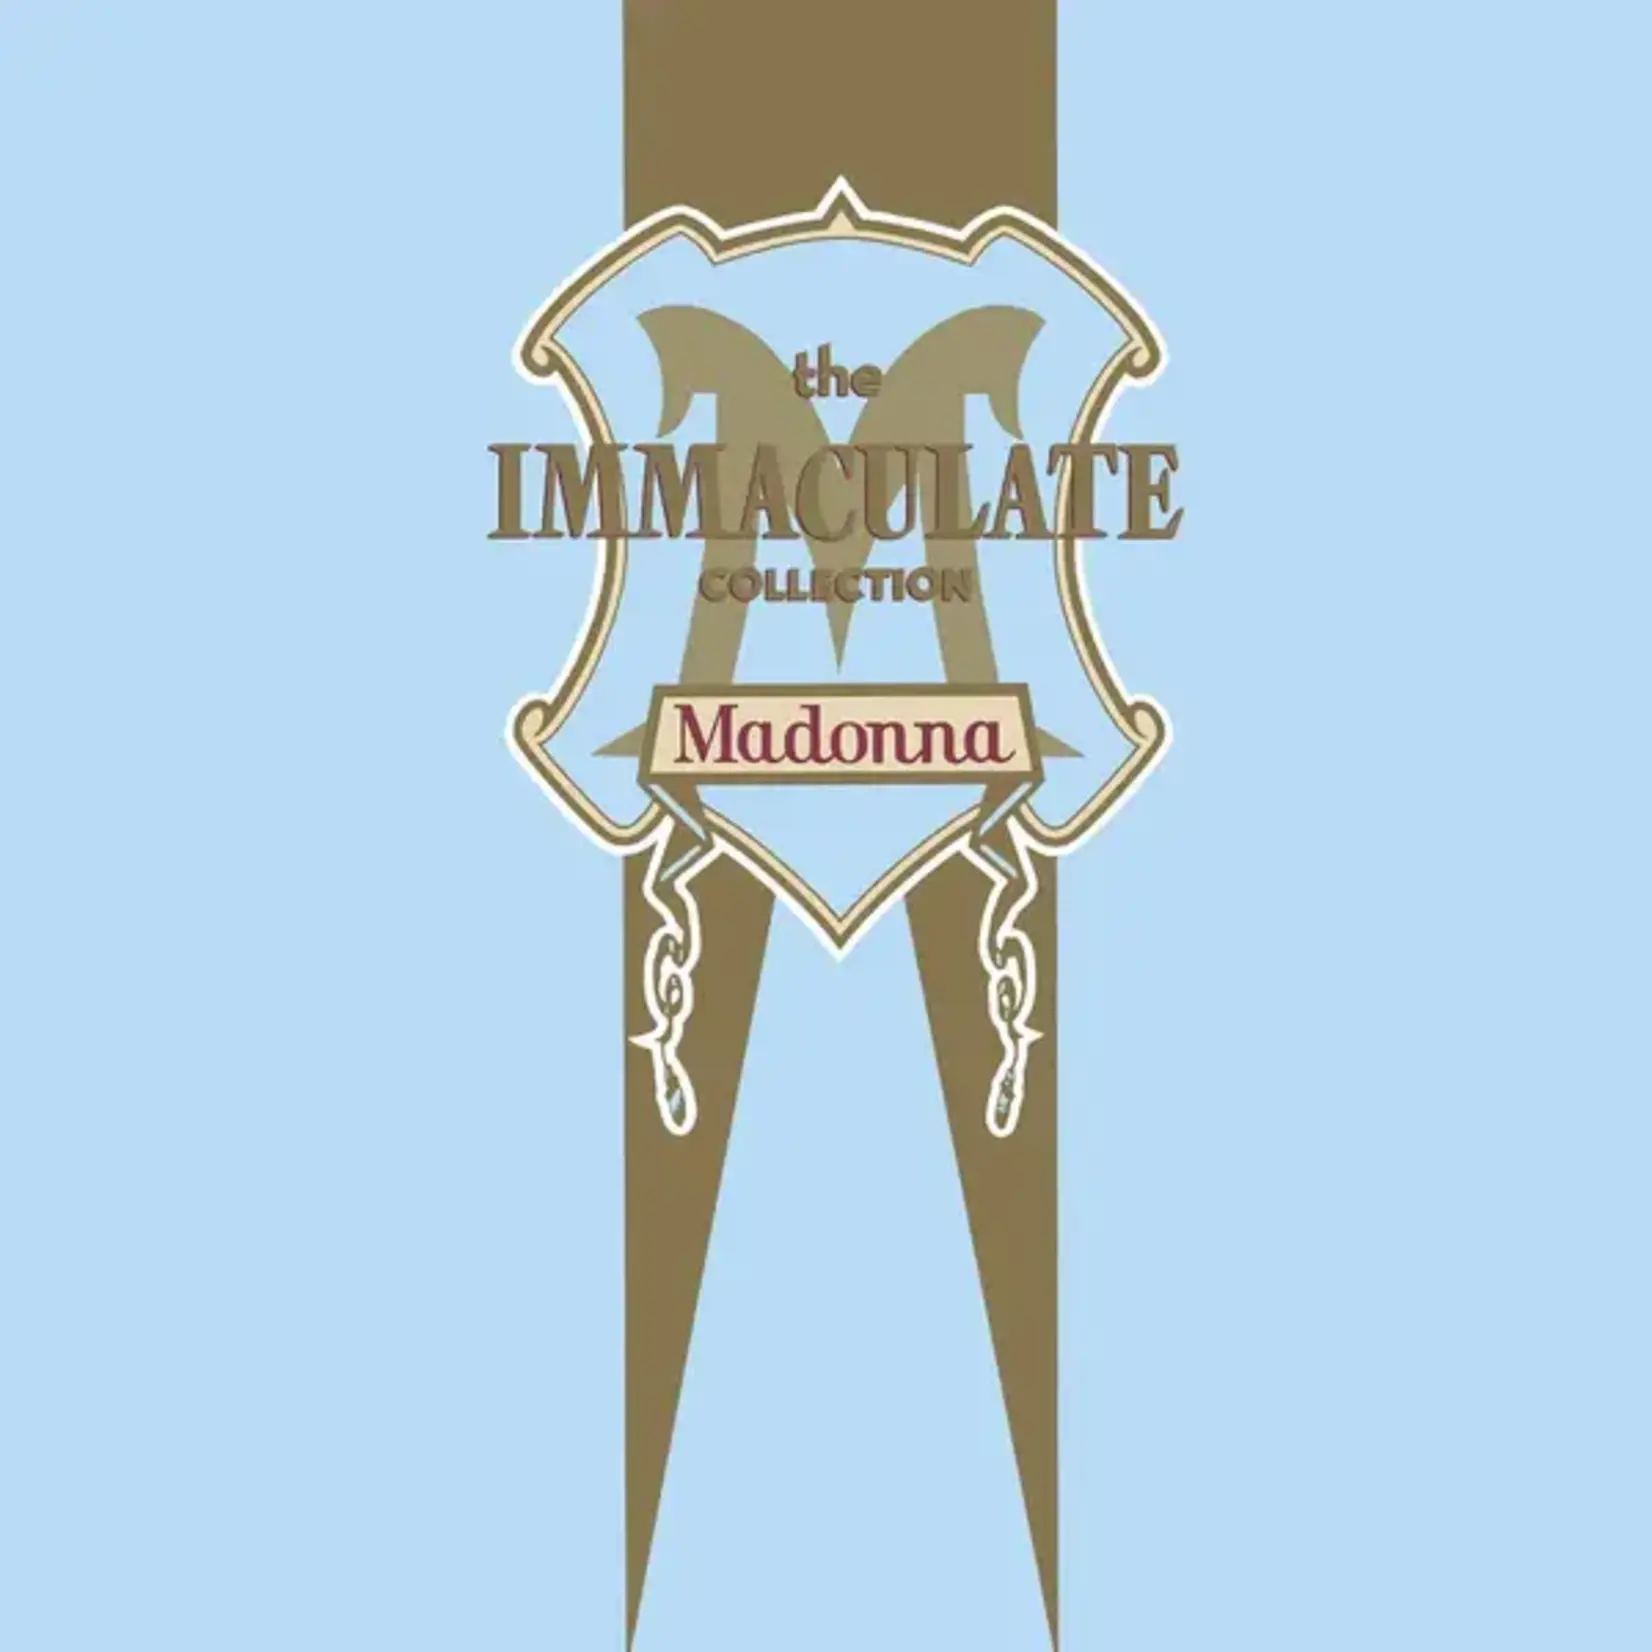 Madonna - The Immaculate Collection (nm) near mint